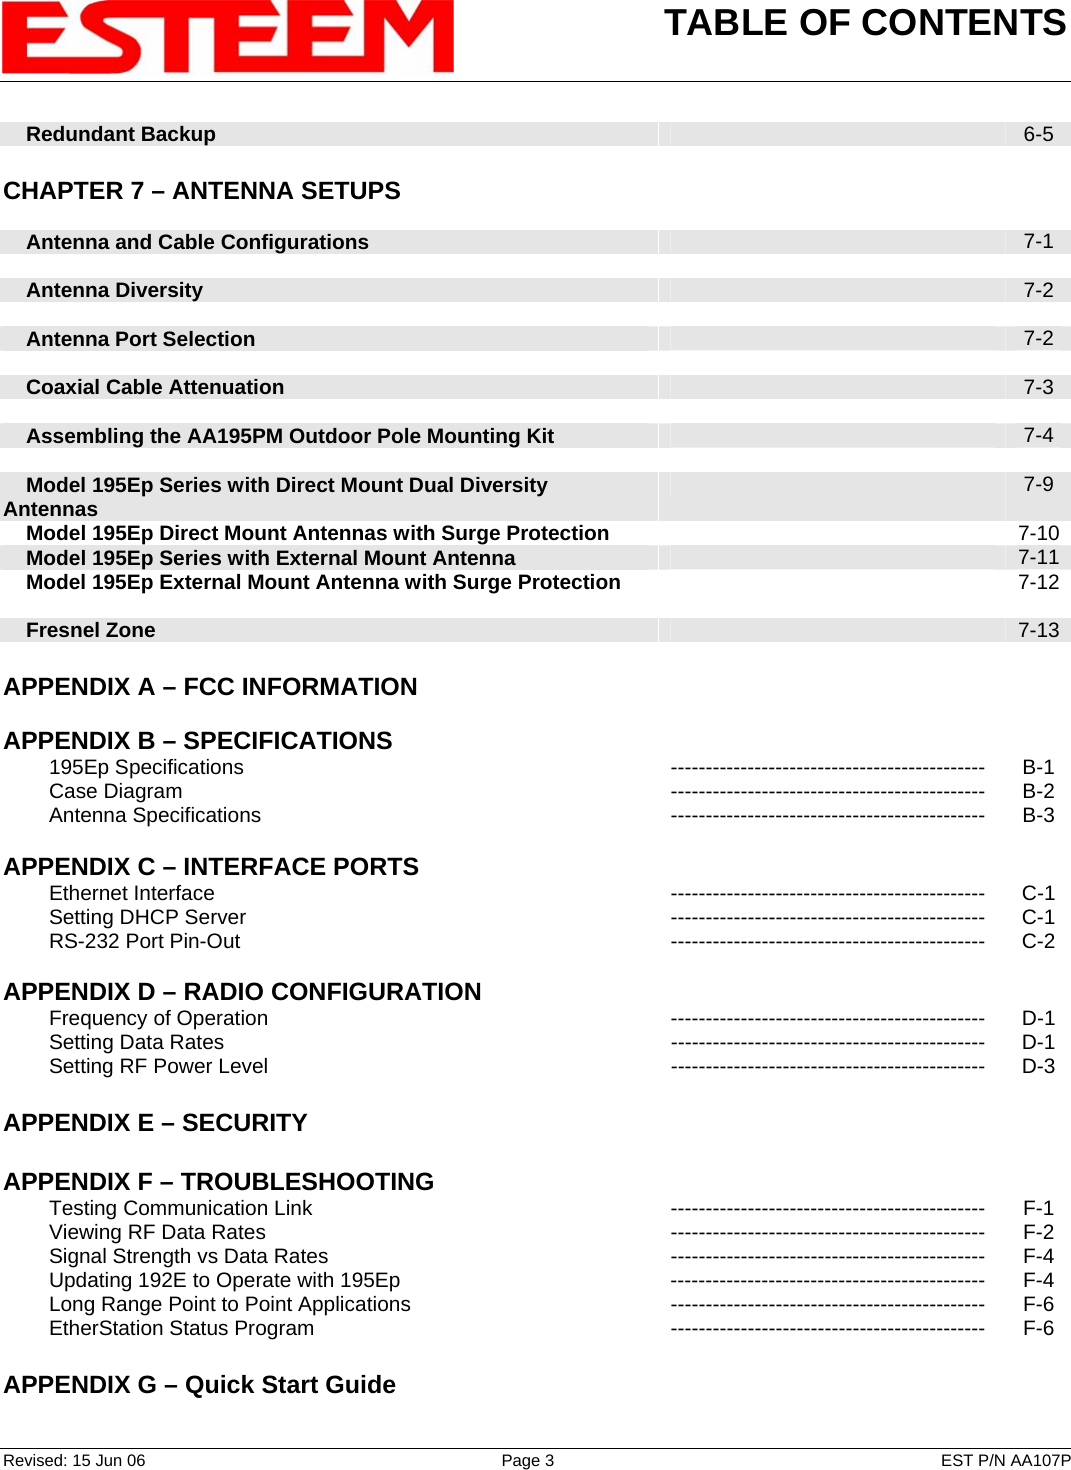 TABLE OF CONTENTS    Revised: 15 Jun 06  Page 3  EST P/N AA107P     Redundant Backup   6-5    CHAPTER 7 – ANTENNA SETUPS          Antenna and Cable Configurations   7-1        Antenna Diversity   7-2        Antenna Port Selection   7-2        Coaxial Cable Attenuation   7-3        Assembling the AA195PM Outdoor Pole Mounting Kit   7-4        Model 195Ep Series with Direct Mount Dual Diversity Antennas   7-9     Model 195Ep Direct Mount Antennas with Surge Protection  7-10    Model 195Ep Series with External Mount Antenna   7-11    Model 195Ep External Mount Antenna with Surge Protection   7-12         Fresnel Zone    7-13   APPENDIX A – FCC INFORMATION       APPENDIX B – SPECIFICATIONS            195Ep Specifications --------------------------------------------- B-1         Case Diagram  ---------------------------------------------  B-2         Antenna Specifications --------------------------------------------- B-3    APPENDIX C – INTERFACE PORTS            Ethernet Interface --------------------------------------------- C-1         Setting DHCP Server  ---------------------------------------------  C-1         RS-232 Port Pin-Out --------------------------------------------- C-2    APPENDIX D – RADIO CONFIGURATION            Frequency of Operation --------------------------------------------- D-1         Setting Data Rates  ---------------------------------------------  D-1         Setting RF Power Level  ---------------------------------------------  D-3    APPENDIX E – SECURITY       APPENDIX F – TROUBLESHOOTING            Testing Communication Link --------------------------------------------- F-1         Viewing RF Data Rates --------------------------------------------- F-2         Signal Strength vs Data Rates --------------------------------------------- F-4         Updating 192E to Operate with 195Ep  --------------------------------------------- F-4         Long Range Point to Point Applications --------------------------------------------- F-6         EtherStation Status Program --------------------------------------------- F-6    APPENDIX G – Quick Start Guide     